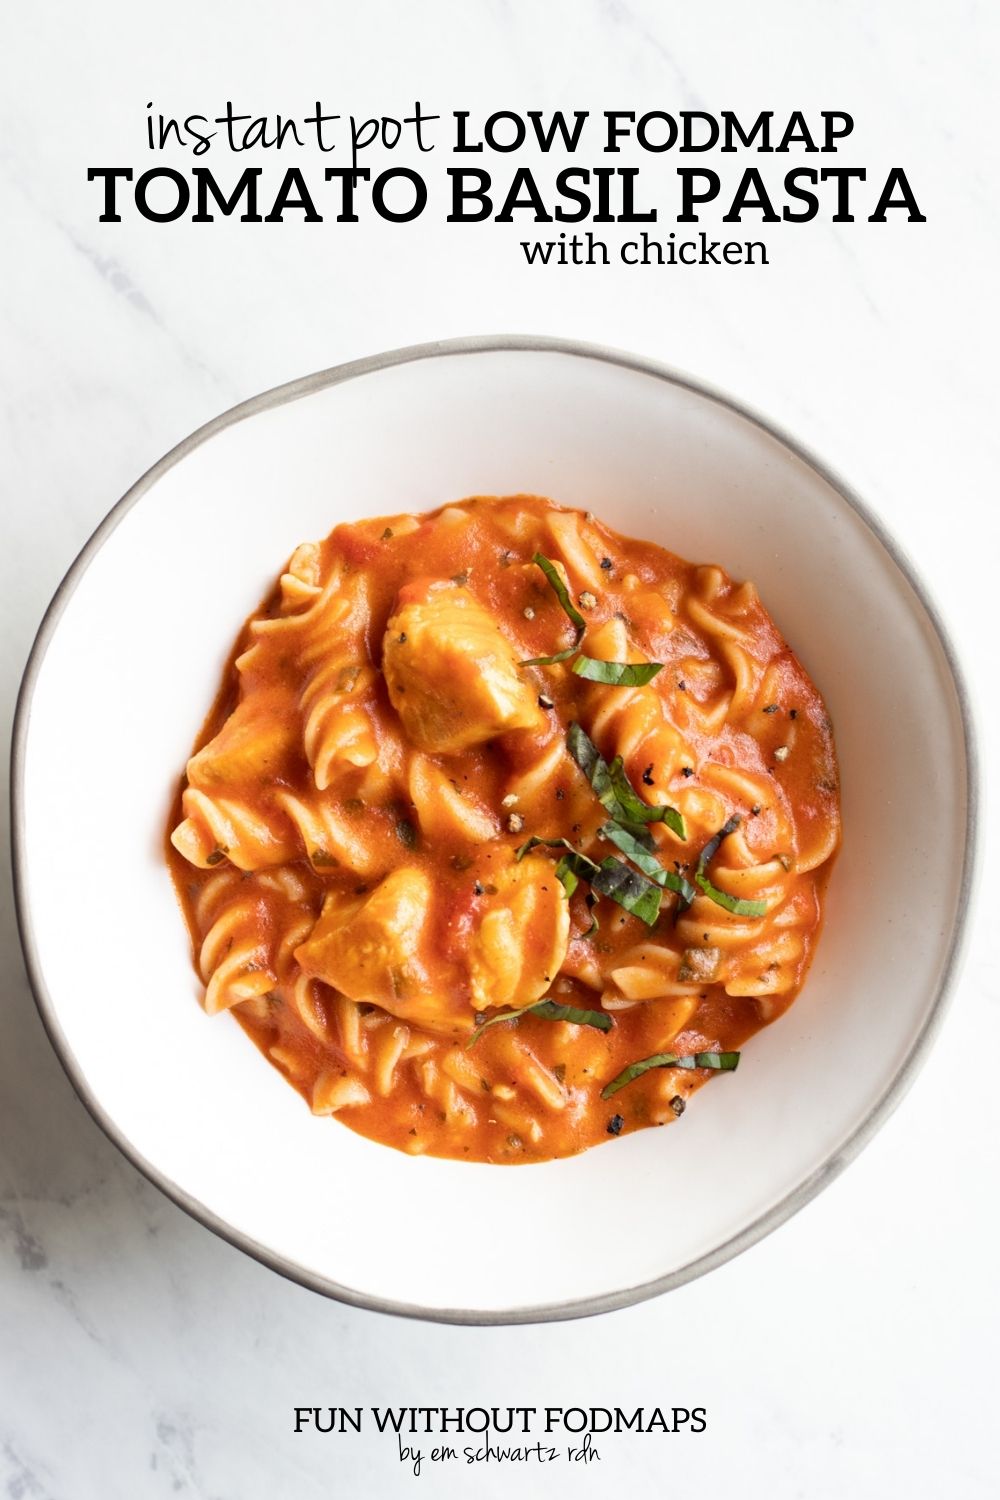 A white bowl filled creamy tomato-basil pasta. The bowl sits on a white marble countertop and above it a black text overlay reads Instant Pot Low FODMAP Tomato Basil Pasta with Chicken.